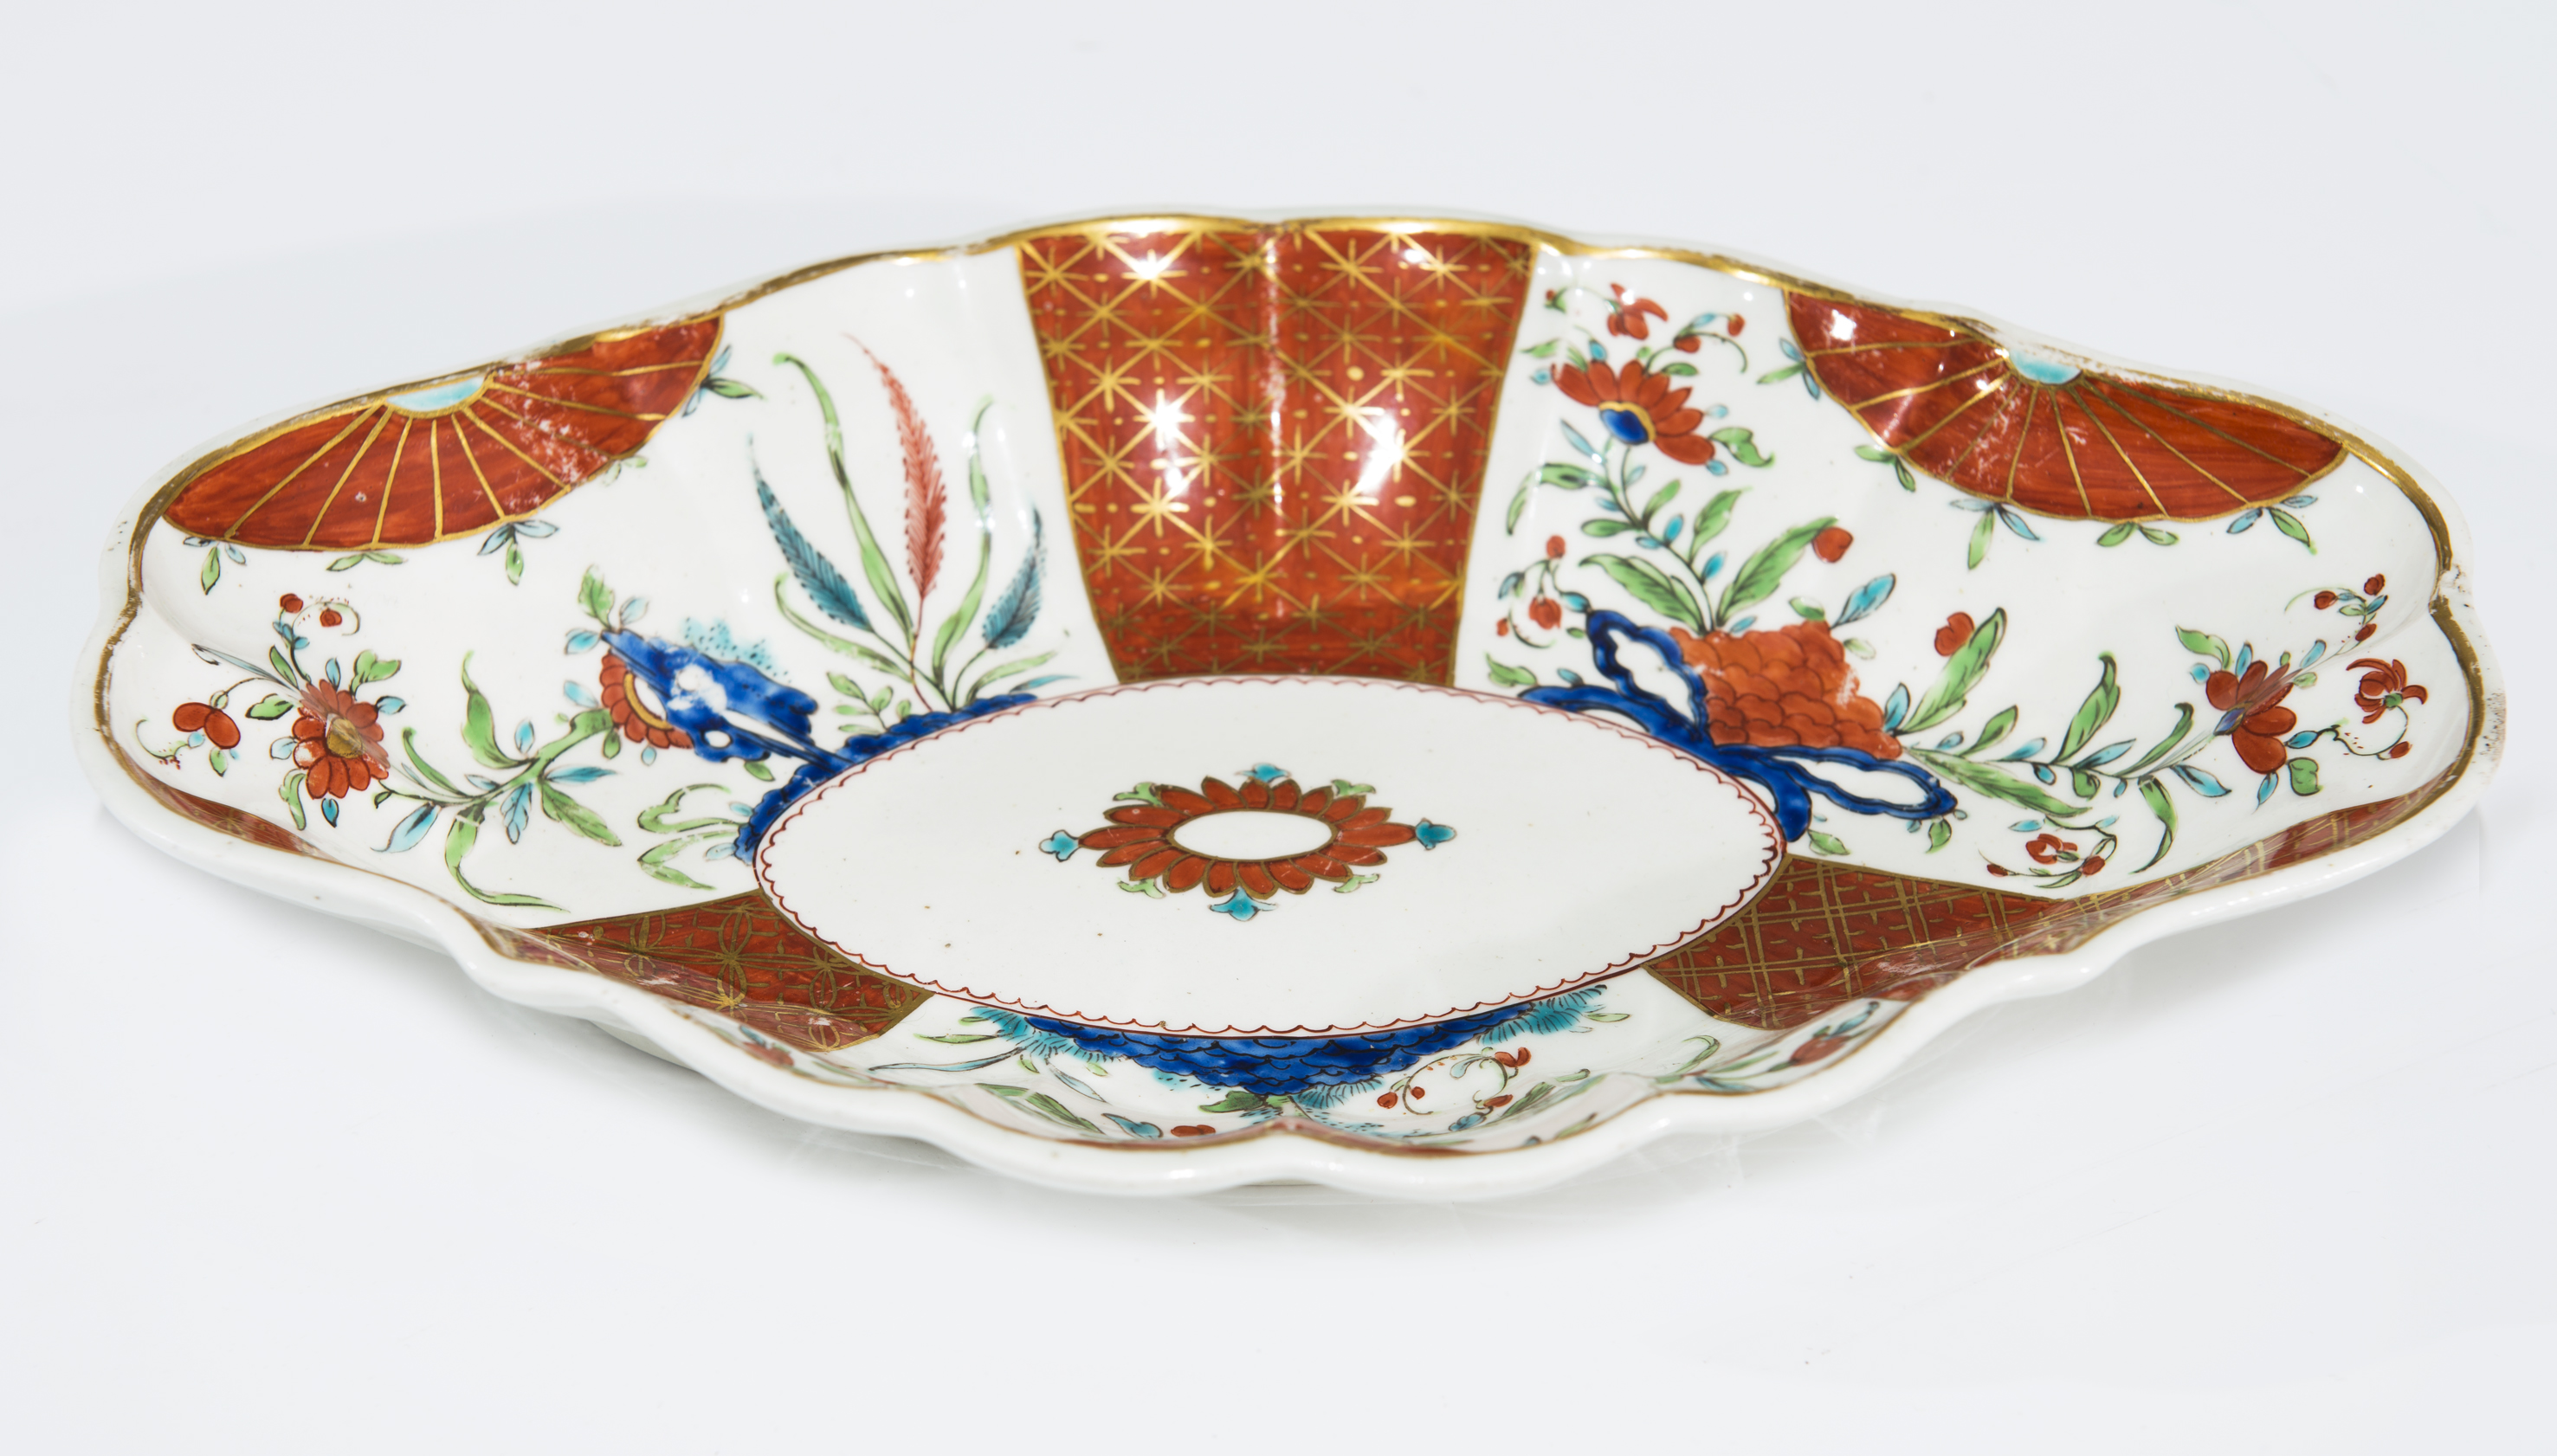 A RARE CAUGHLEY FLUTED LOZENGE-FORM DISH, late 18th century, painted with flowering stems and leaves